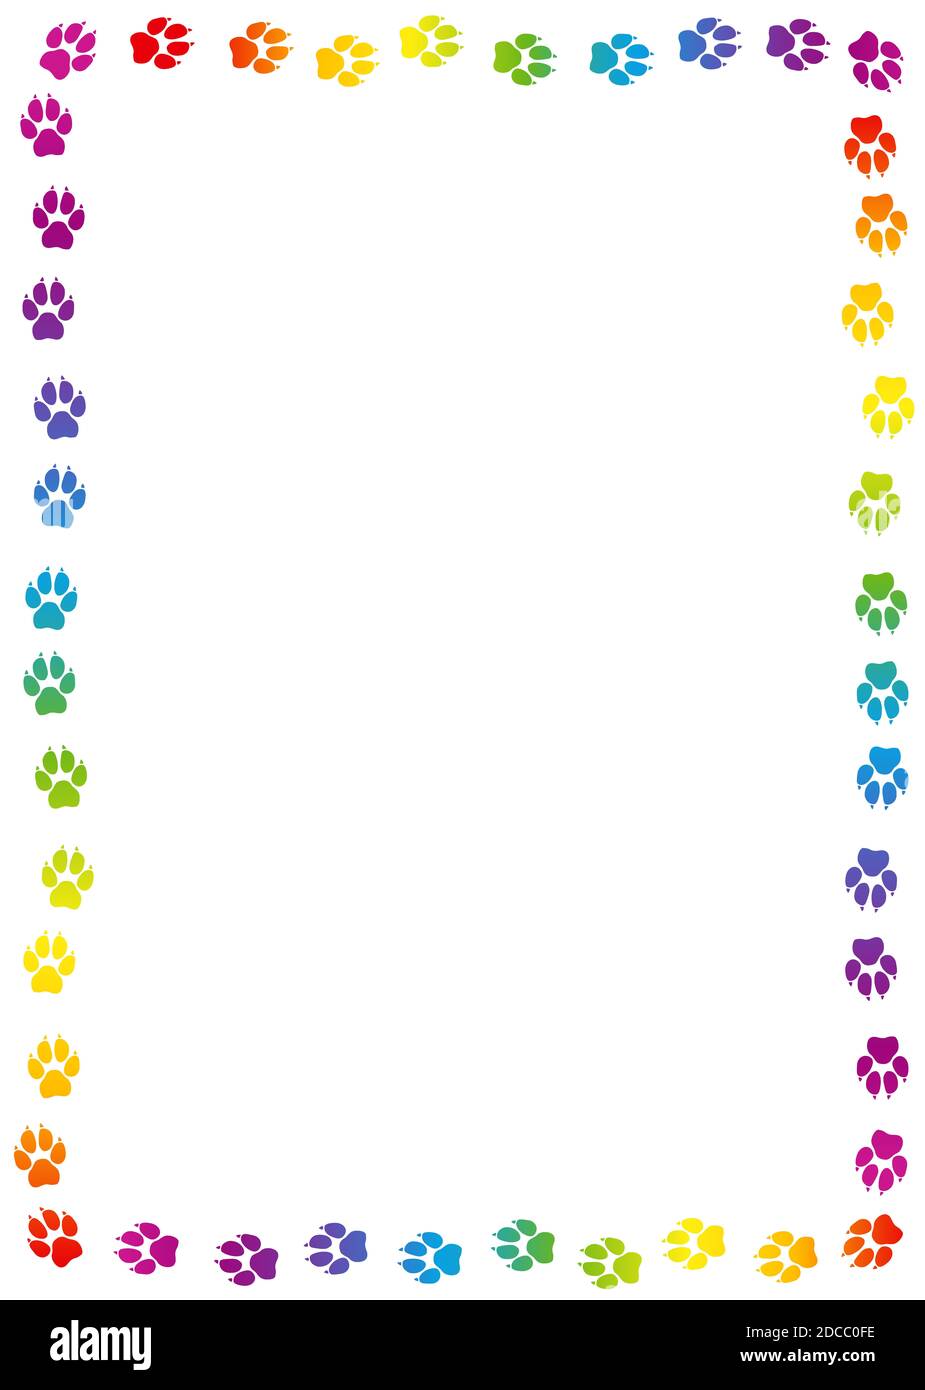 Dogs paw print frame. Rainbow colored dog track, colorful footprints - illustration on white background. Stock Photo